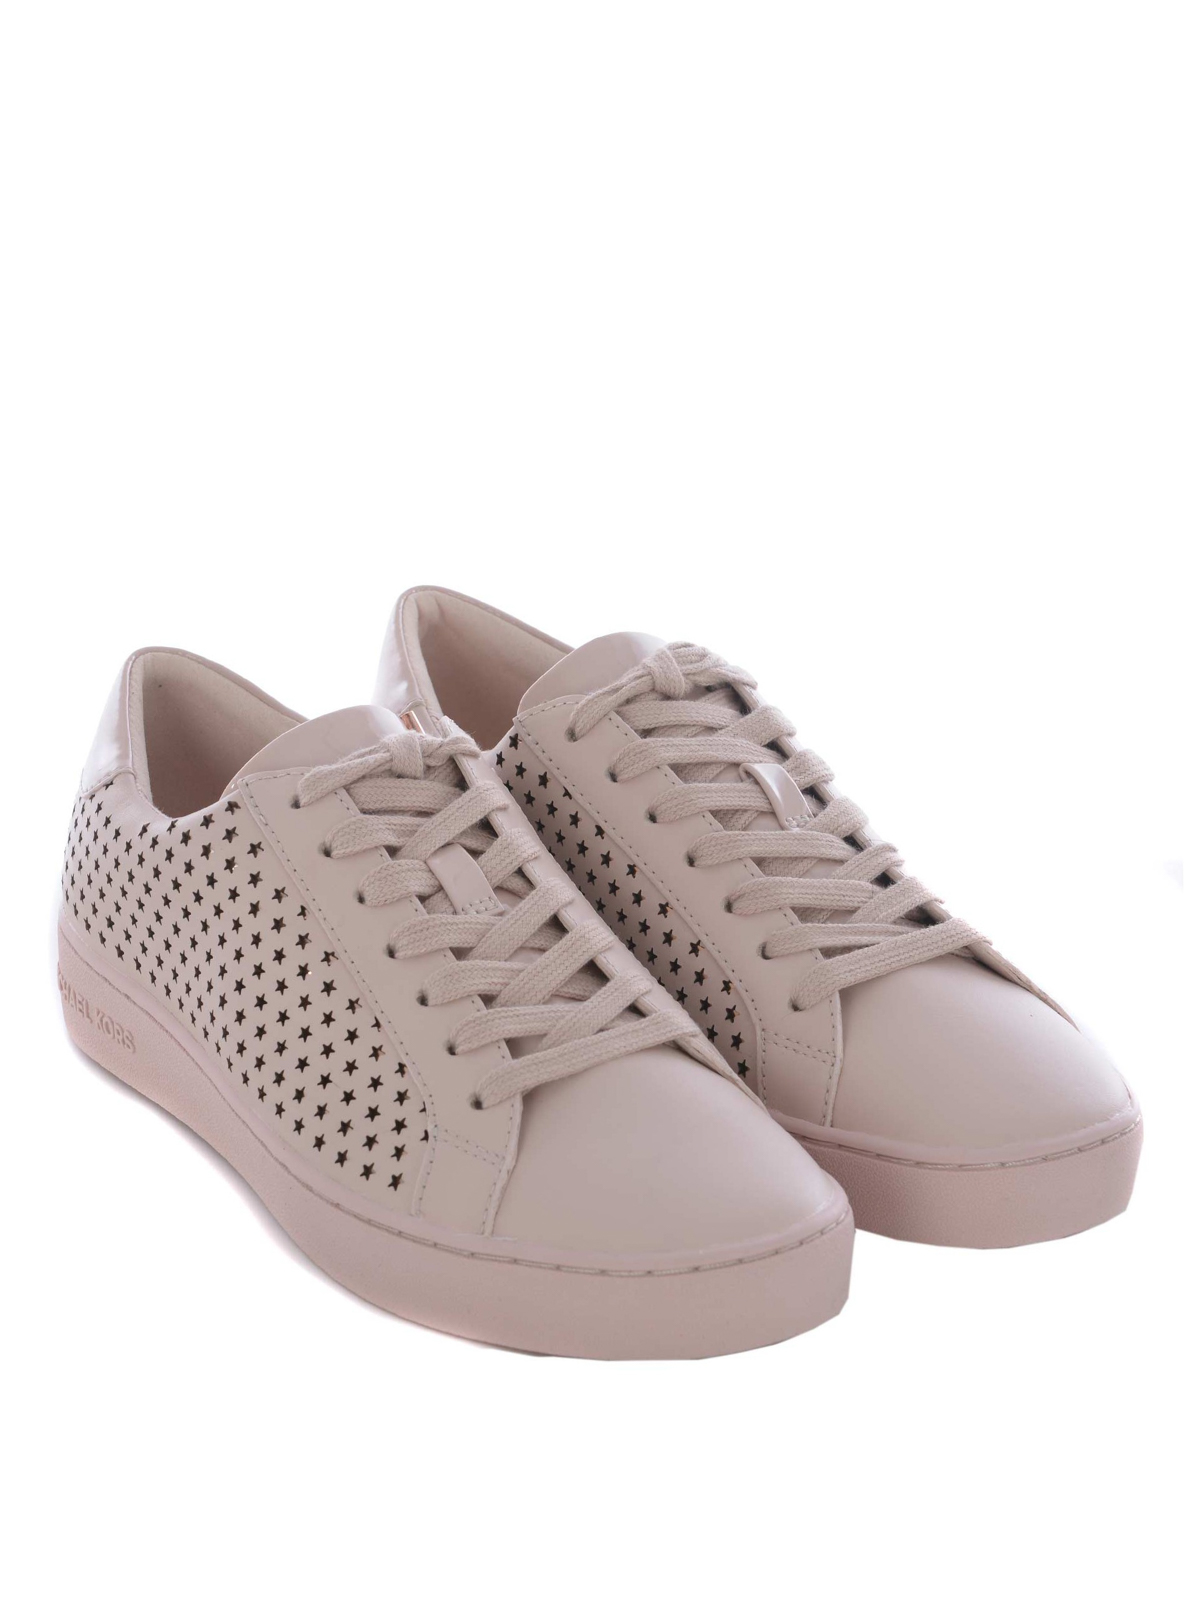 Irving cut-out stars pink sneakers 